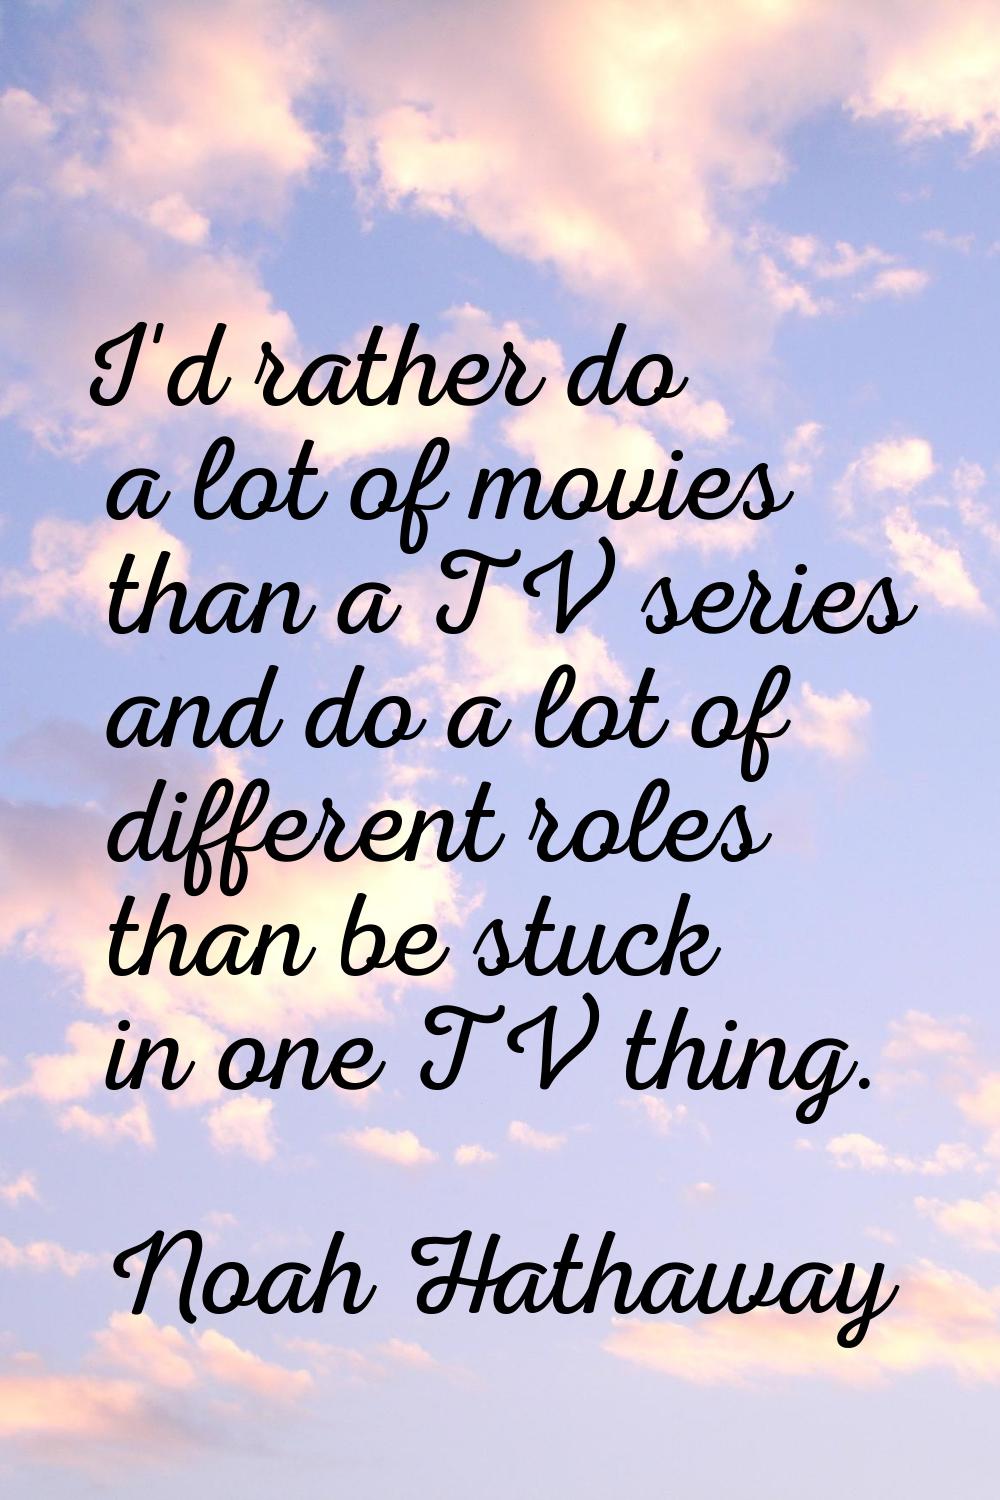 I'd rather do a lot of movies than a TV series and do a lot of different roles than be stuck in one